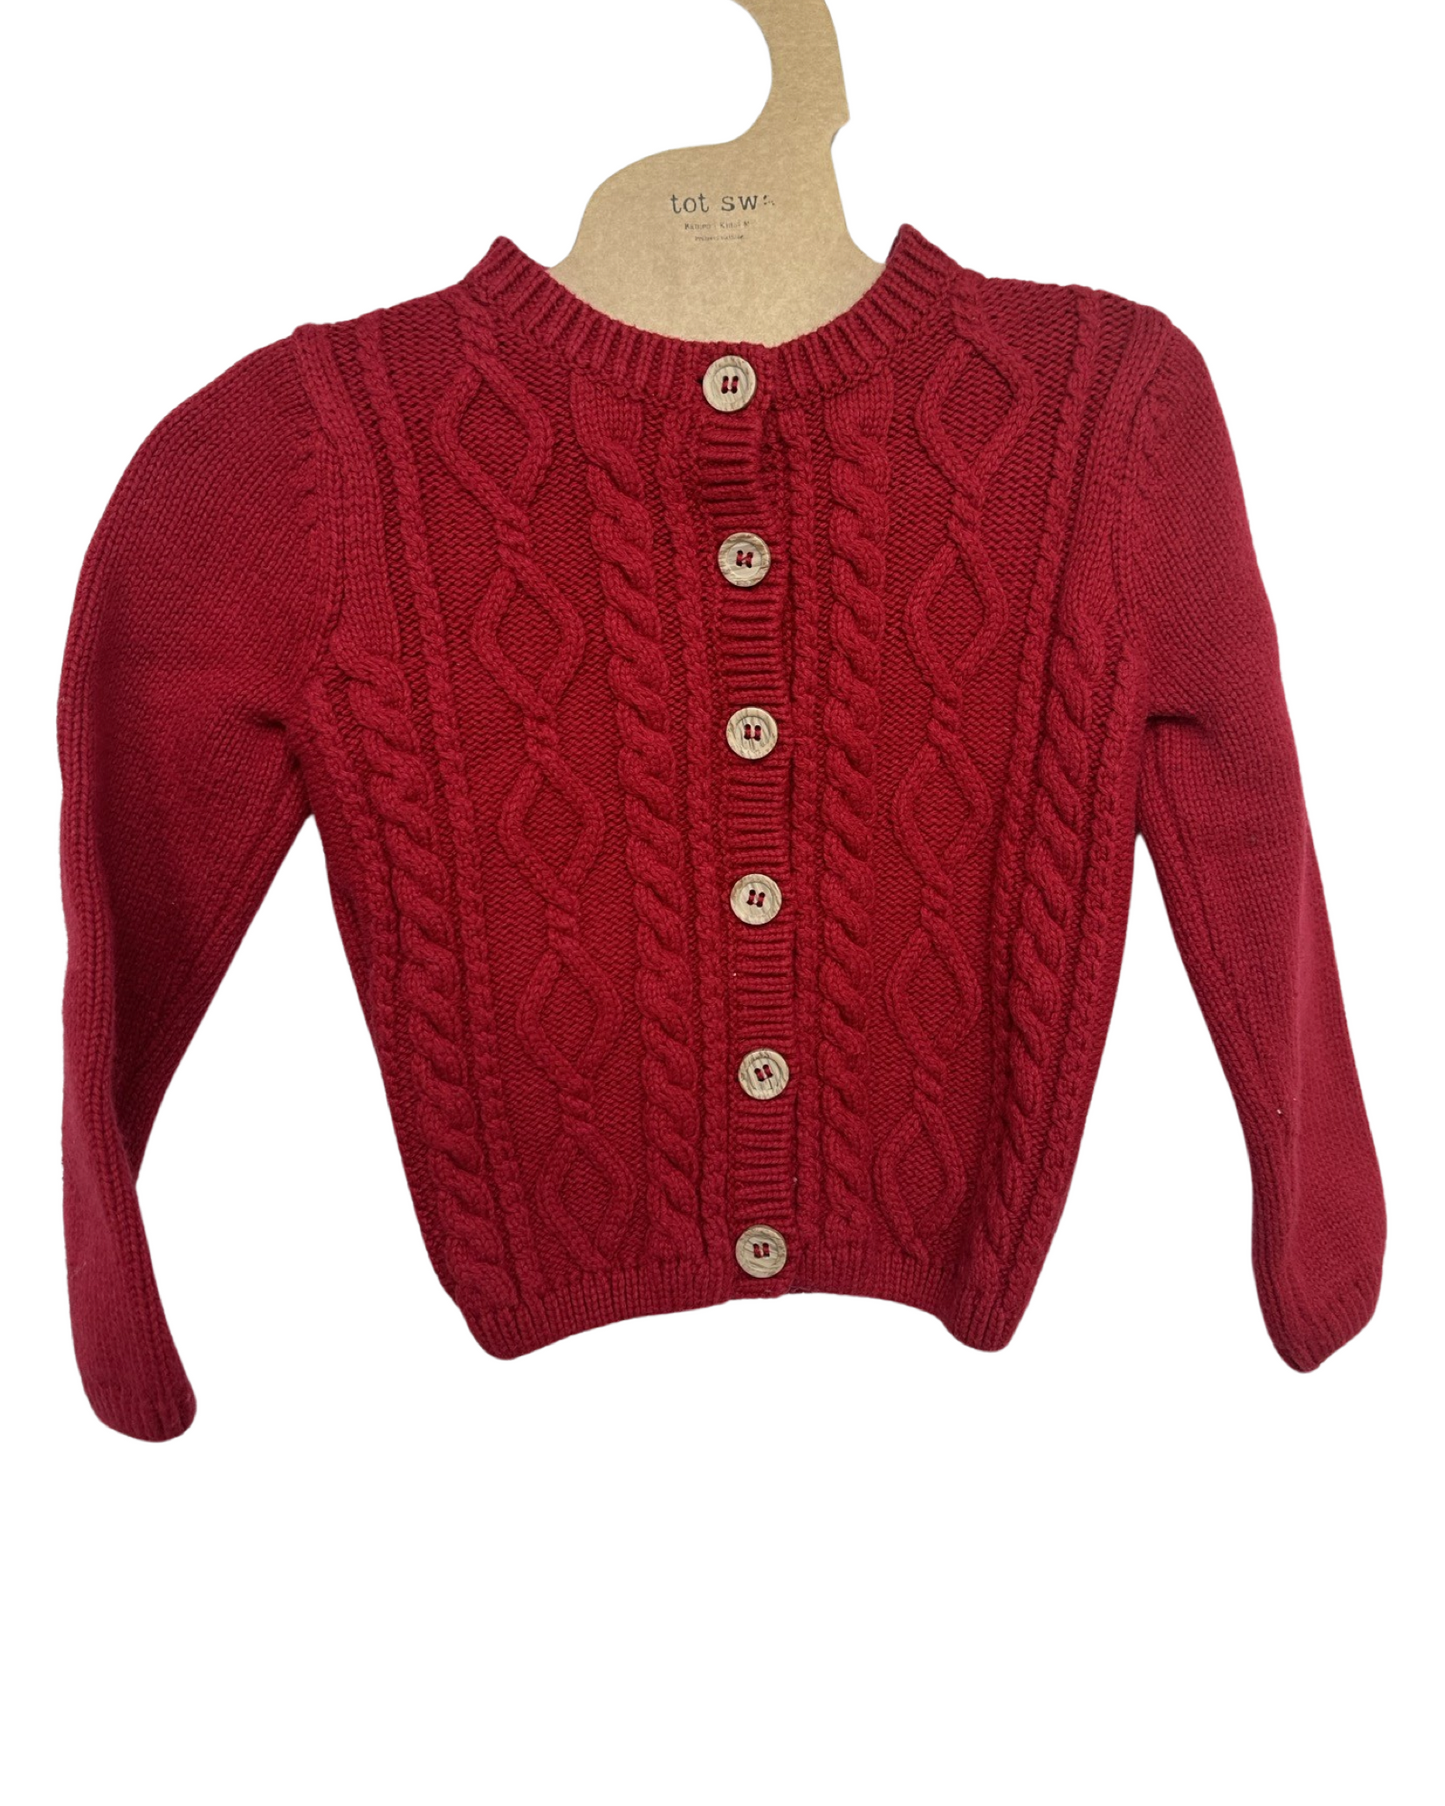 Mothercare heritage red cable knit cardigan (size 2-3yrs)